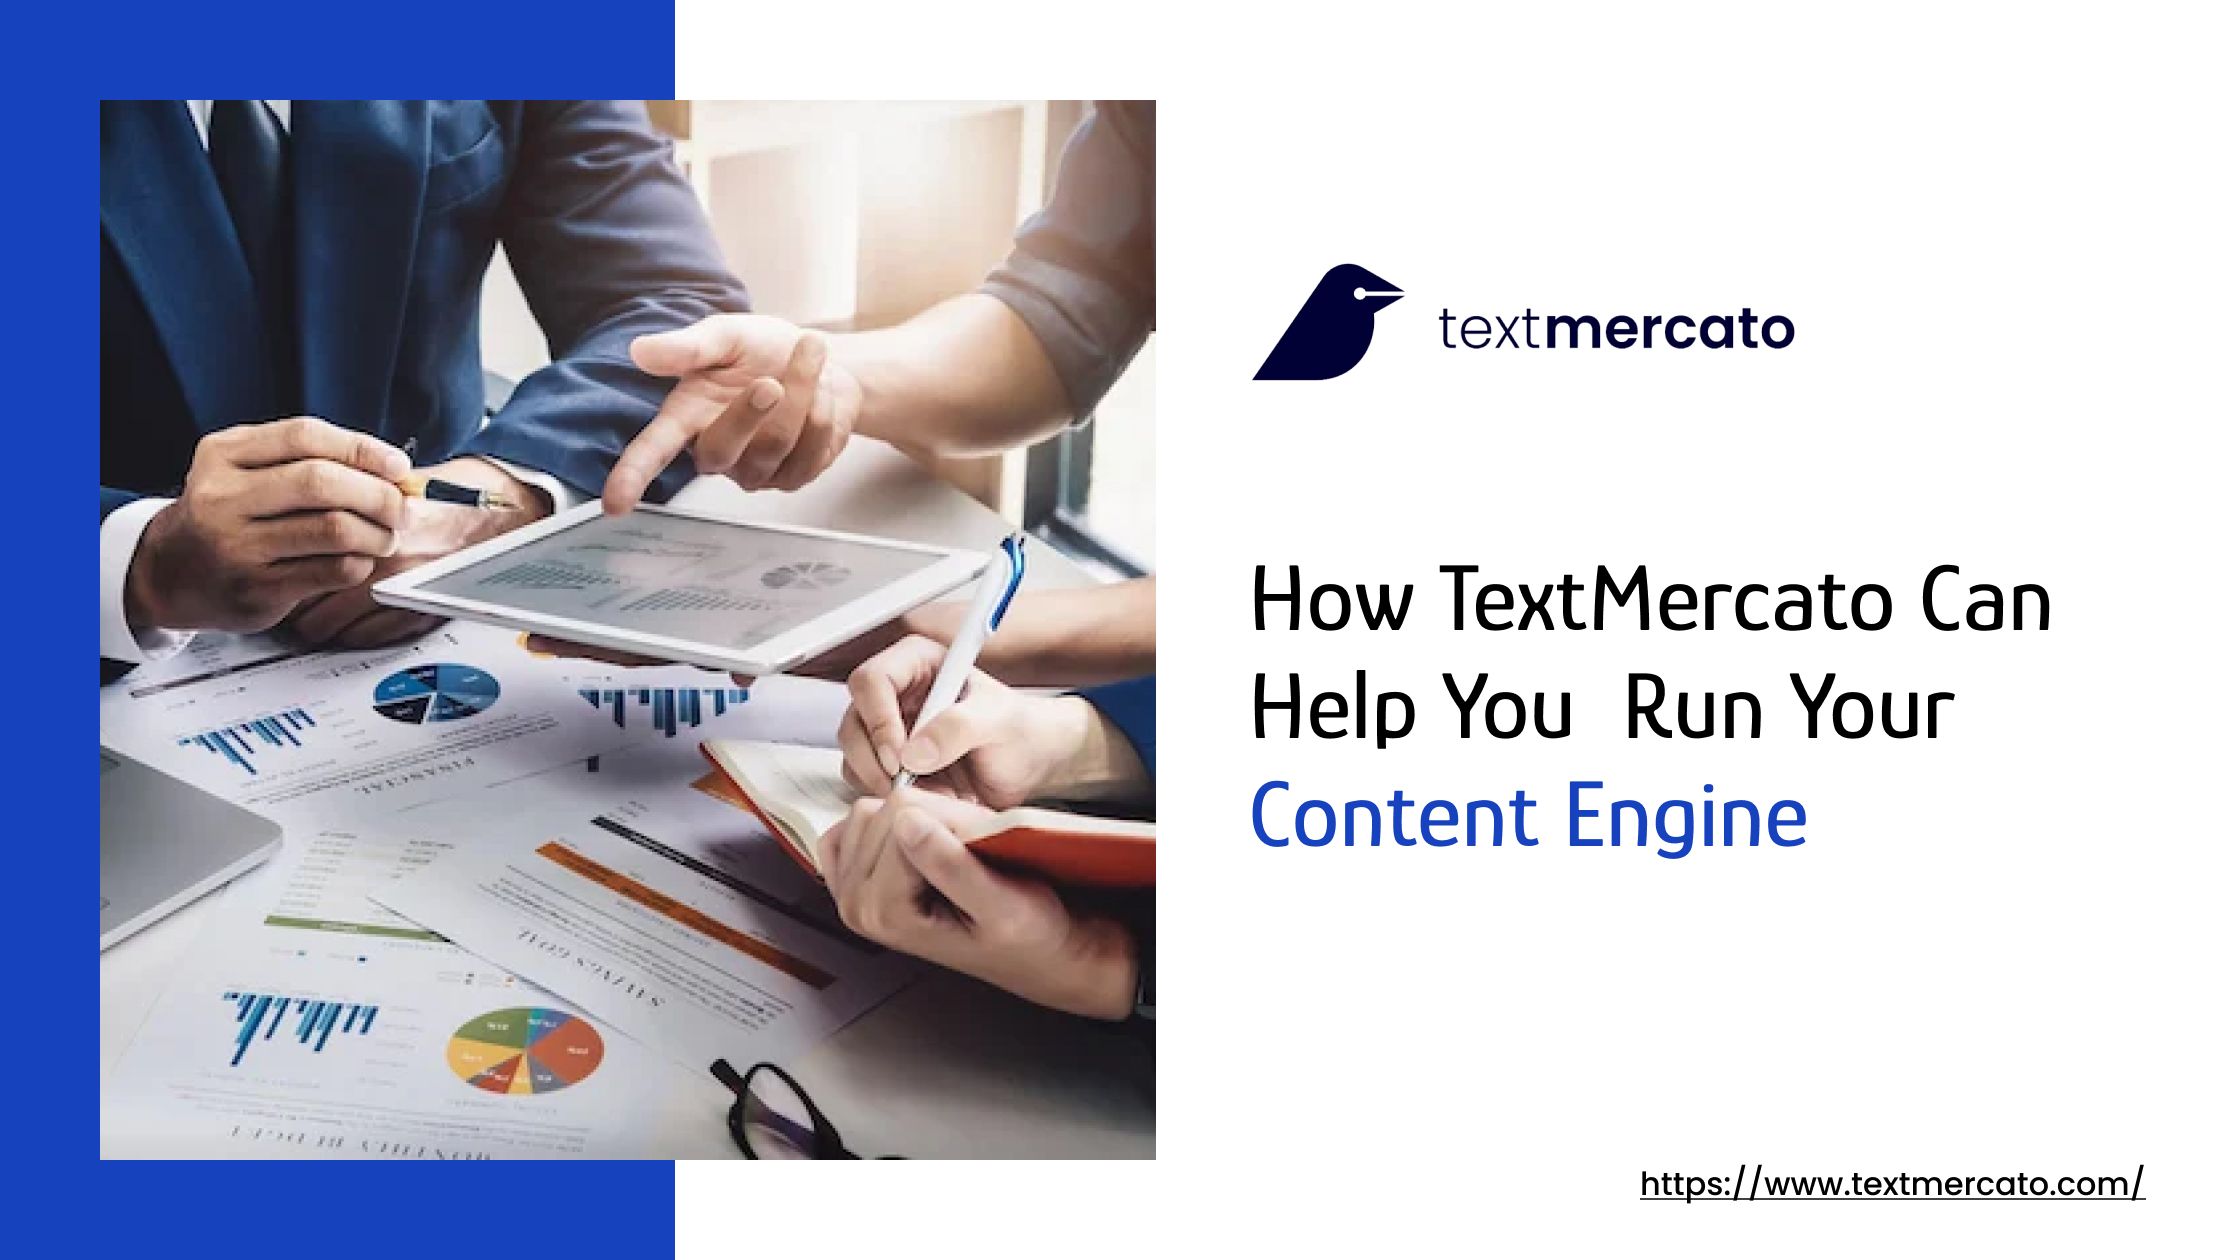 How TextMercato Can Help You Run Your Content Engine